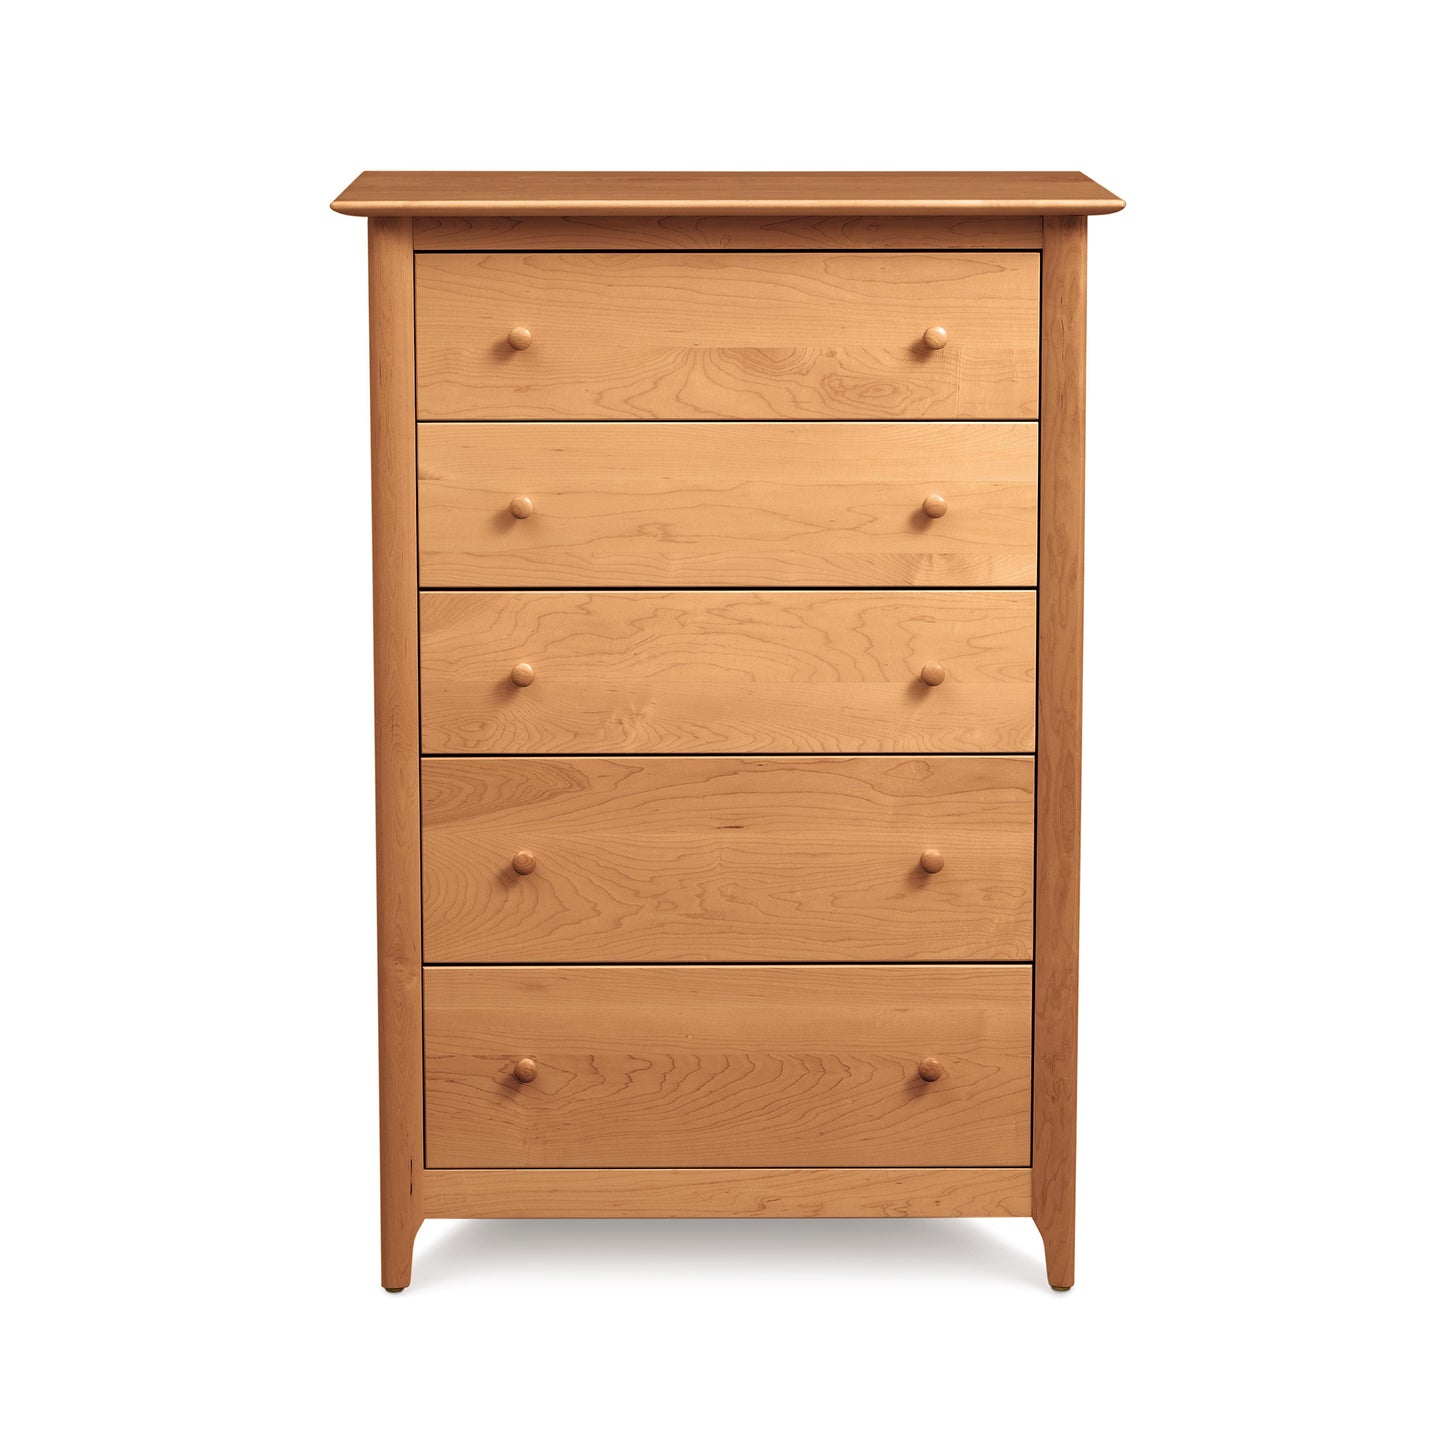 A Sarah 5-Drawer Chest by Copeland Furniture, with a Shaker design, crafted from cherry wood, on a white background.